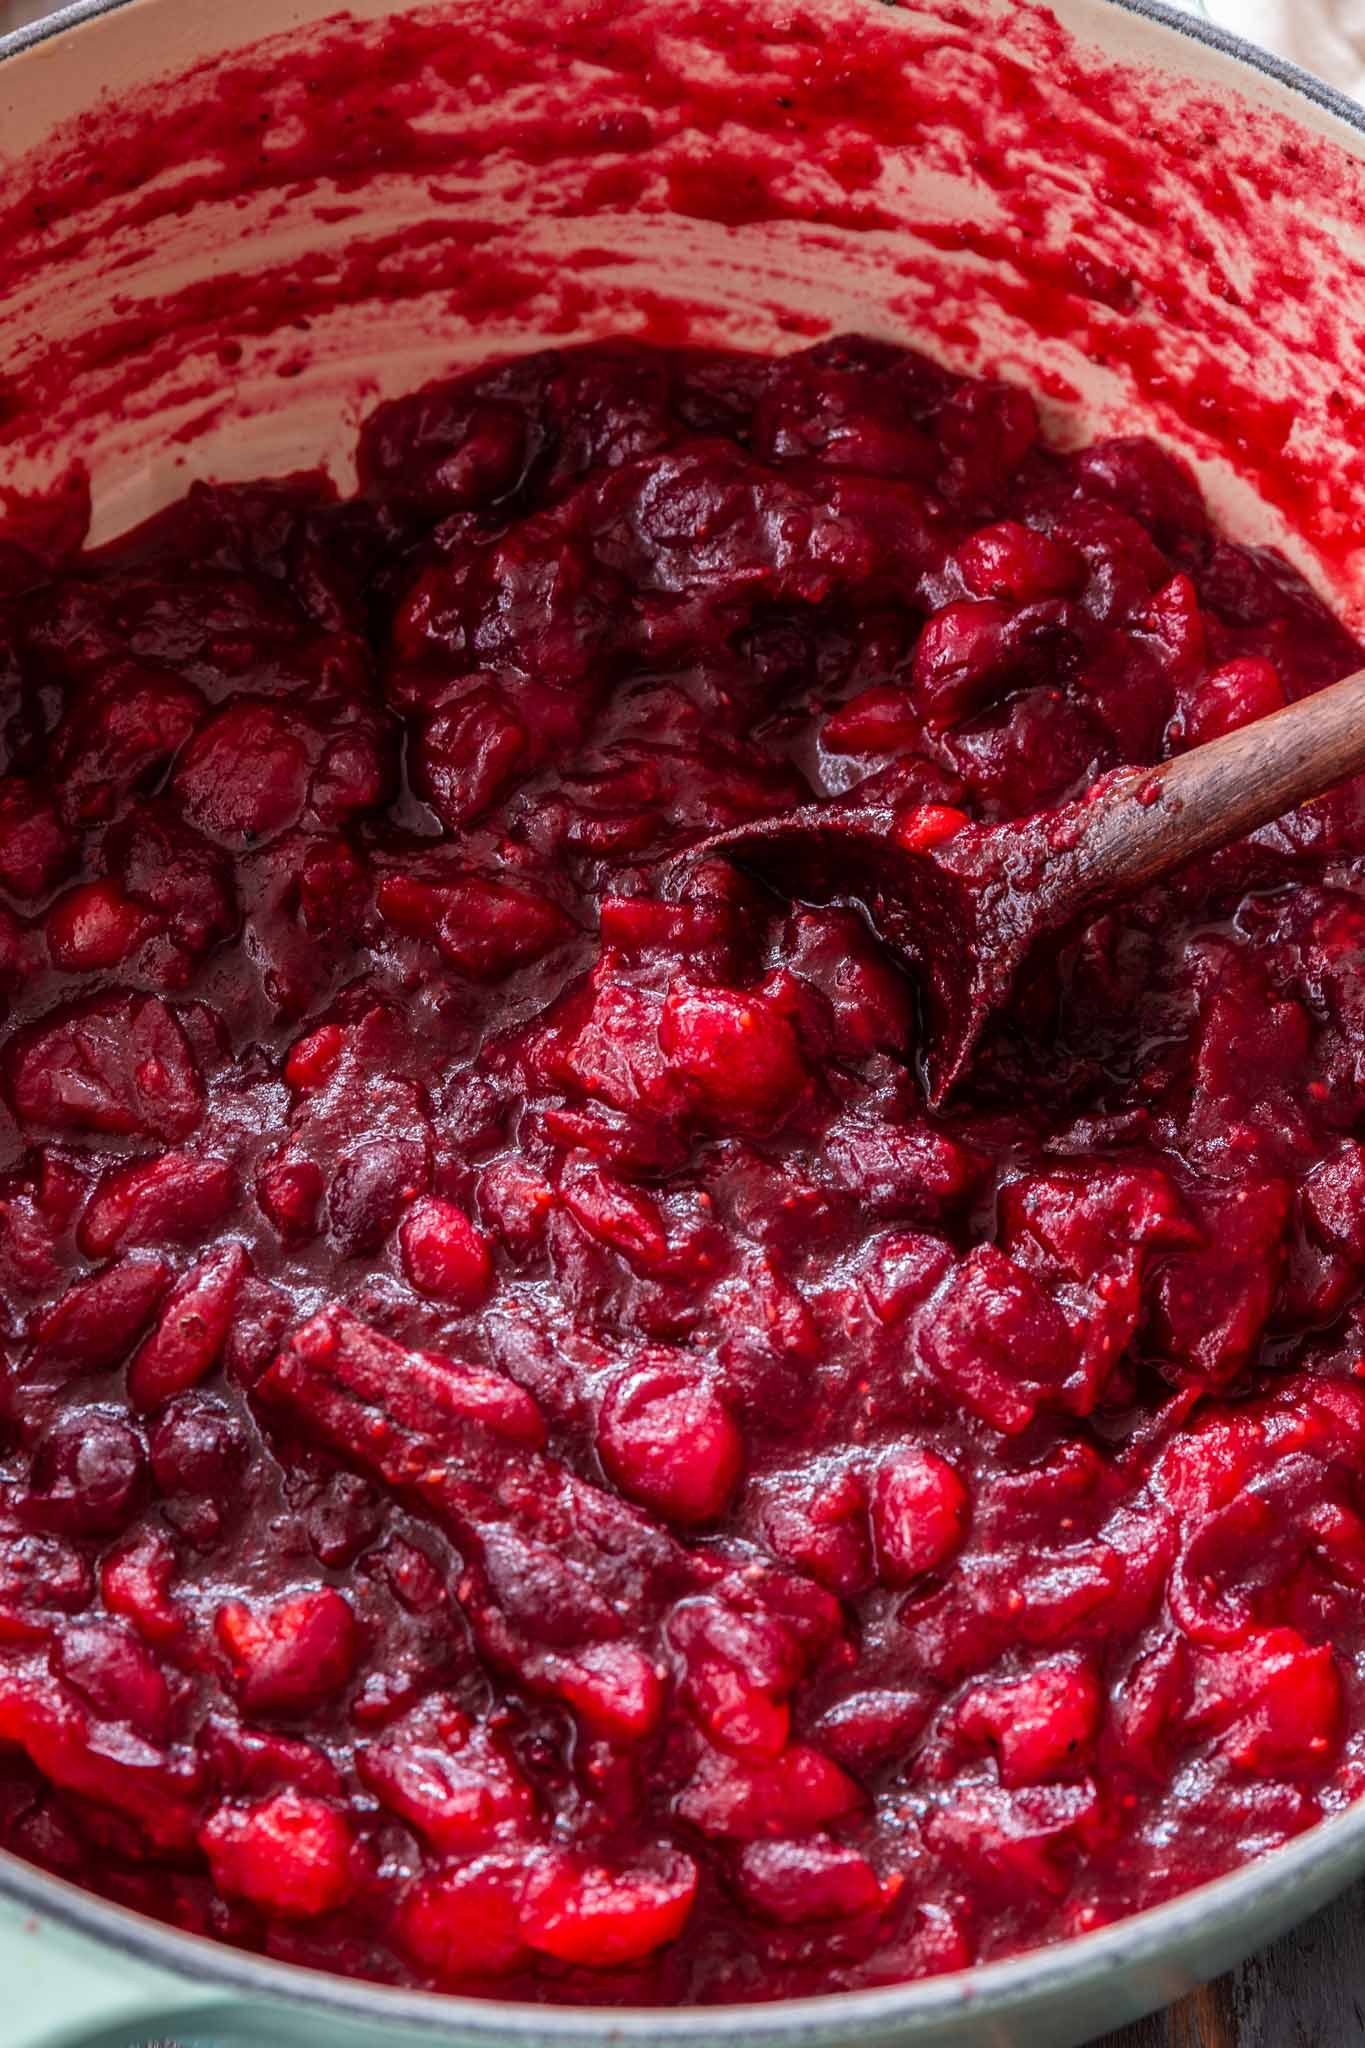 Honey Bourbon Cranberry Sauce | www.oliviascuisine.com | This Honey Bourbon Cranberry Sauce might steal the show this Thanksgiving! Sweet, tart, chunky and so easy to make. You will never buy the canned stuff again! (Recipe and food photography by @oliviascuisine.)